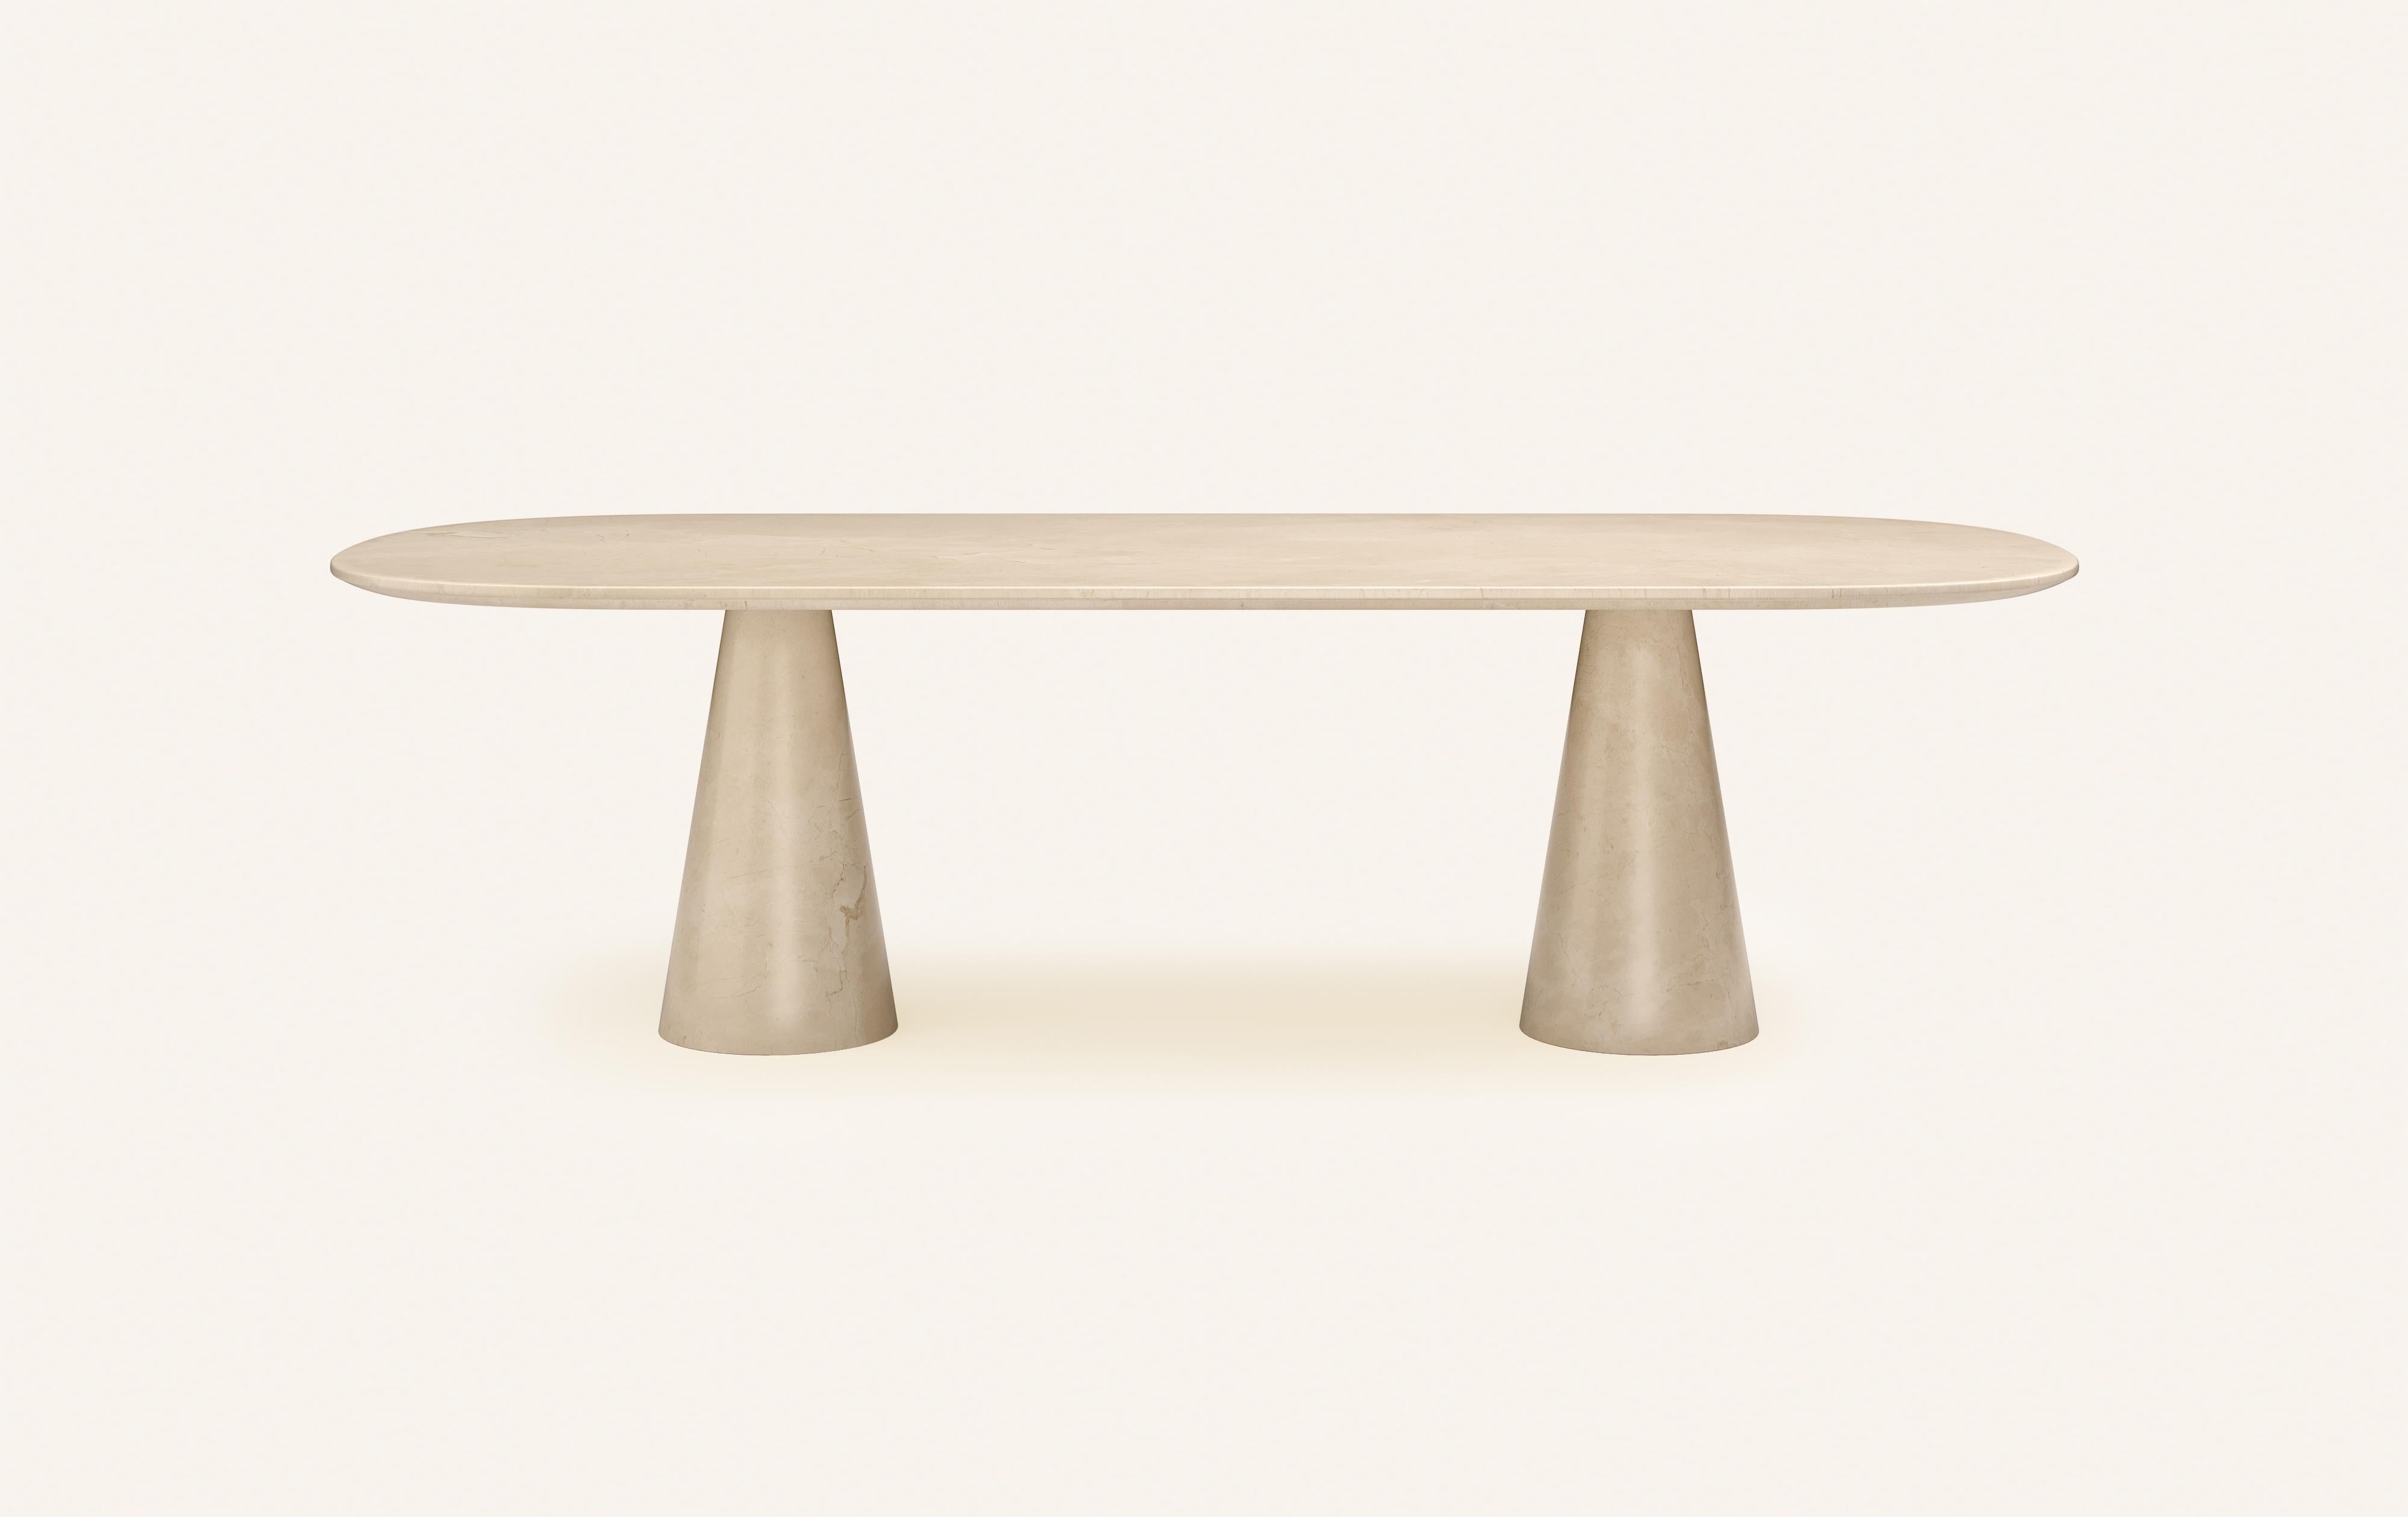 SIMPLISTIC YET MUSCULAR FORMS INFLUENCED BY POST MODERN ITALIAN DESIGN.

DIMENSIONS: 
108”L x 48”W x 30”H: 
- 1.5